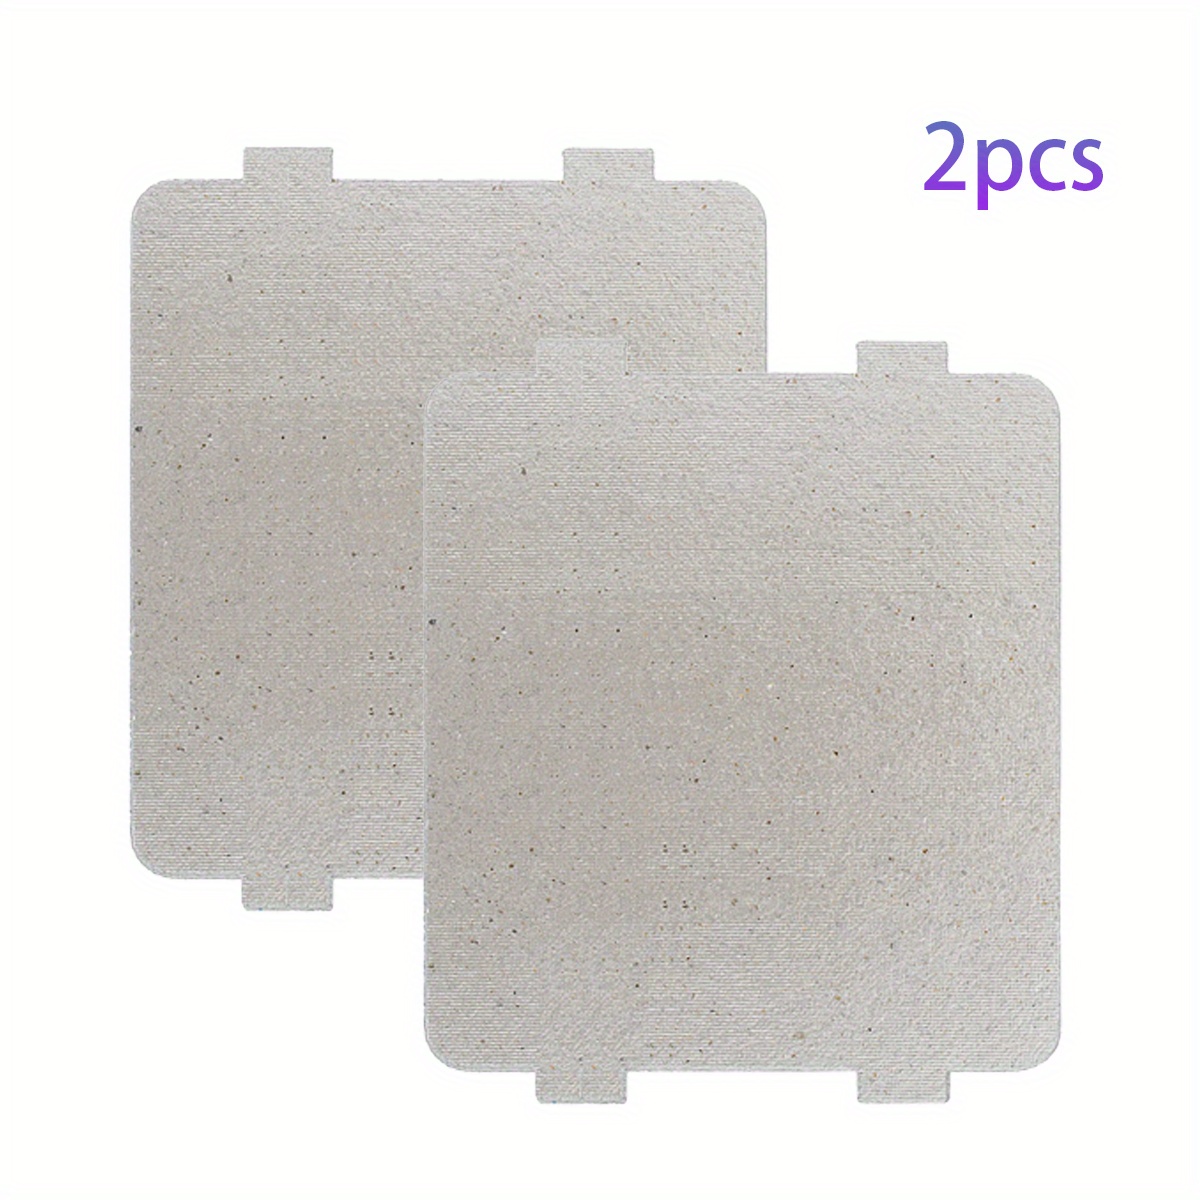 5pcs waveguide cover universal mica sheet for all microwave oven cut to size 150x120mm oven mica plate sheet repairing parts for home kitchen office restaurant microwave replacement accessory